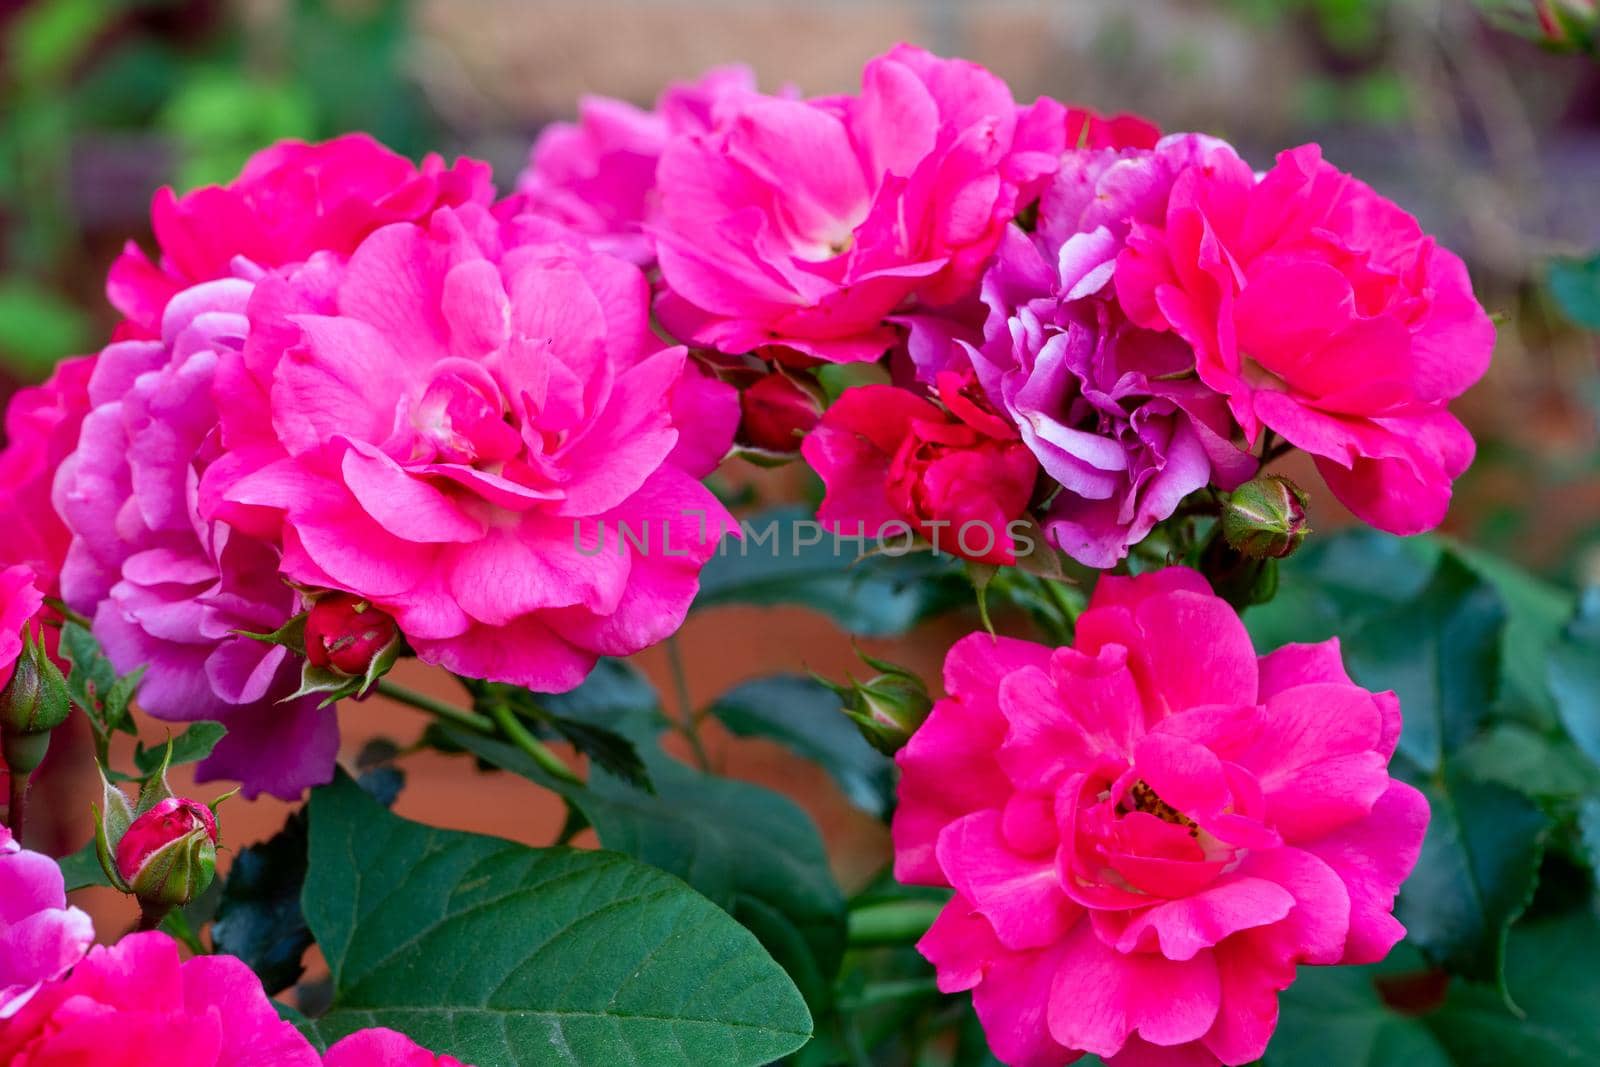 Roses floribunda bright pink red flowers in garden lawn. A bed of beautiful flowering roses in a garden setting.